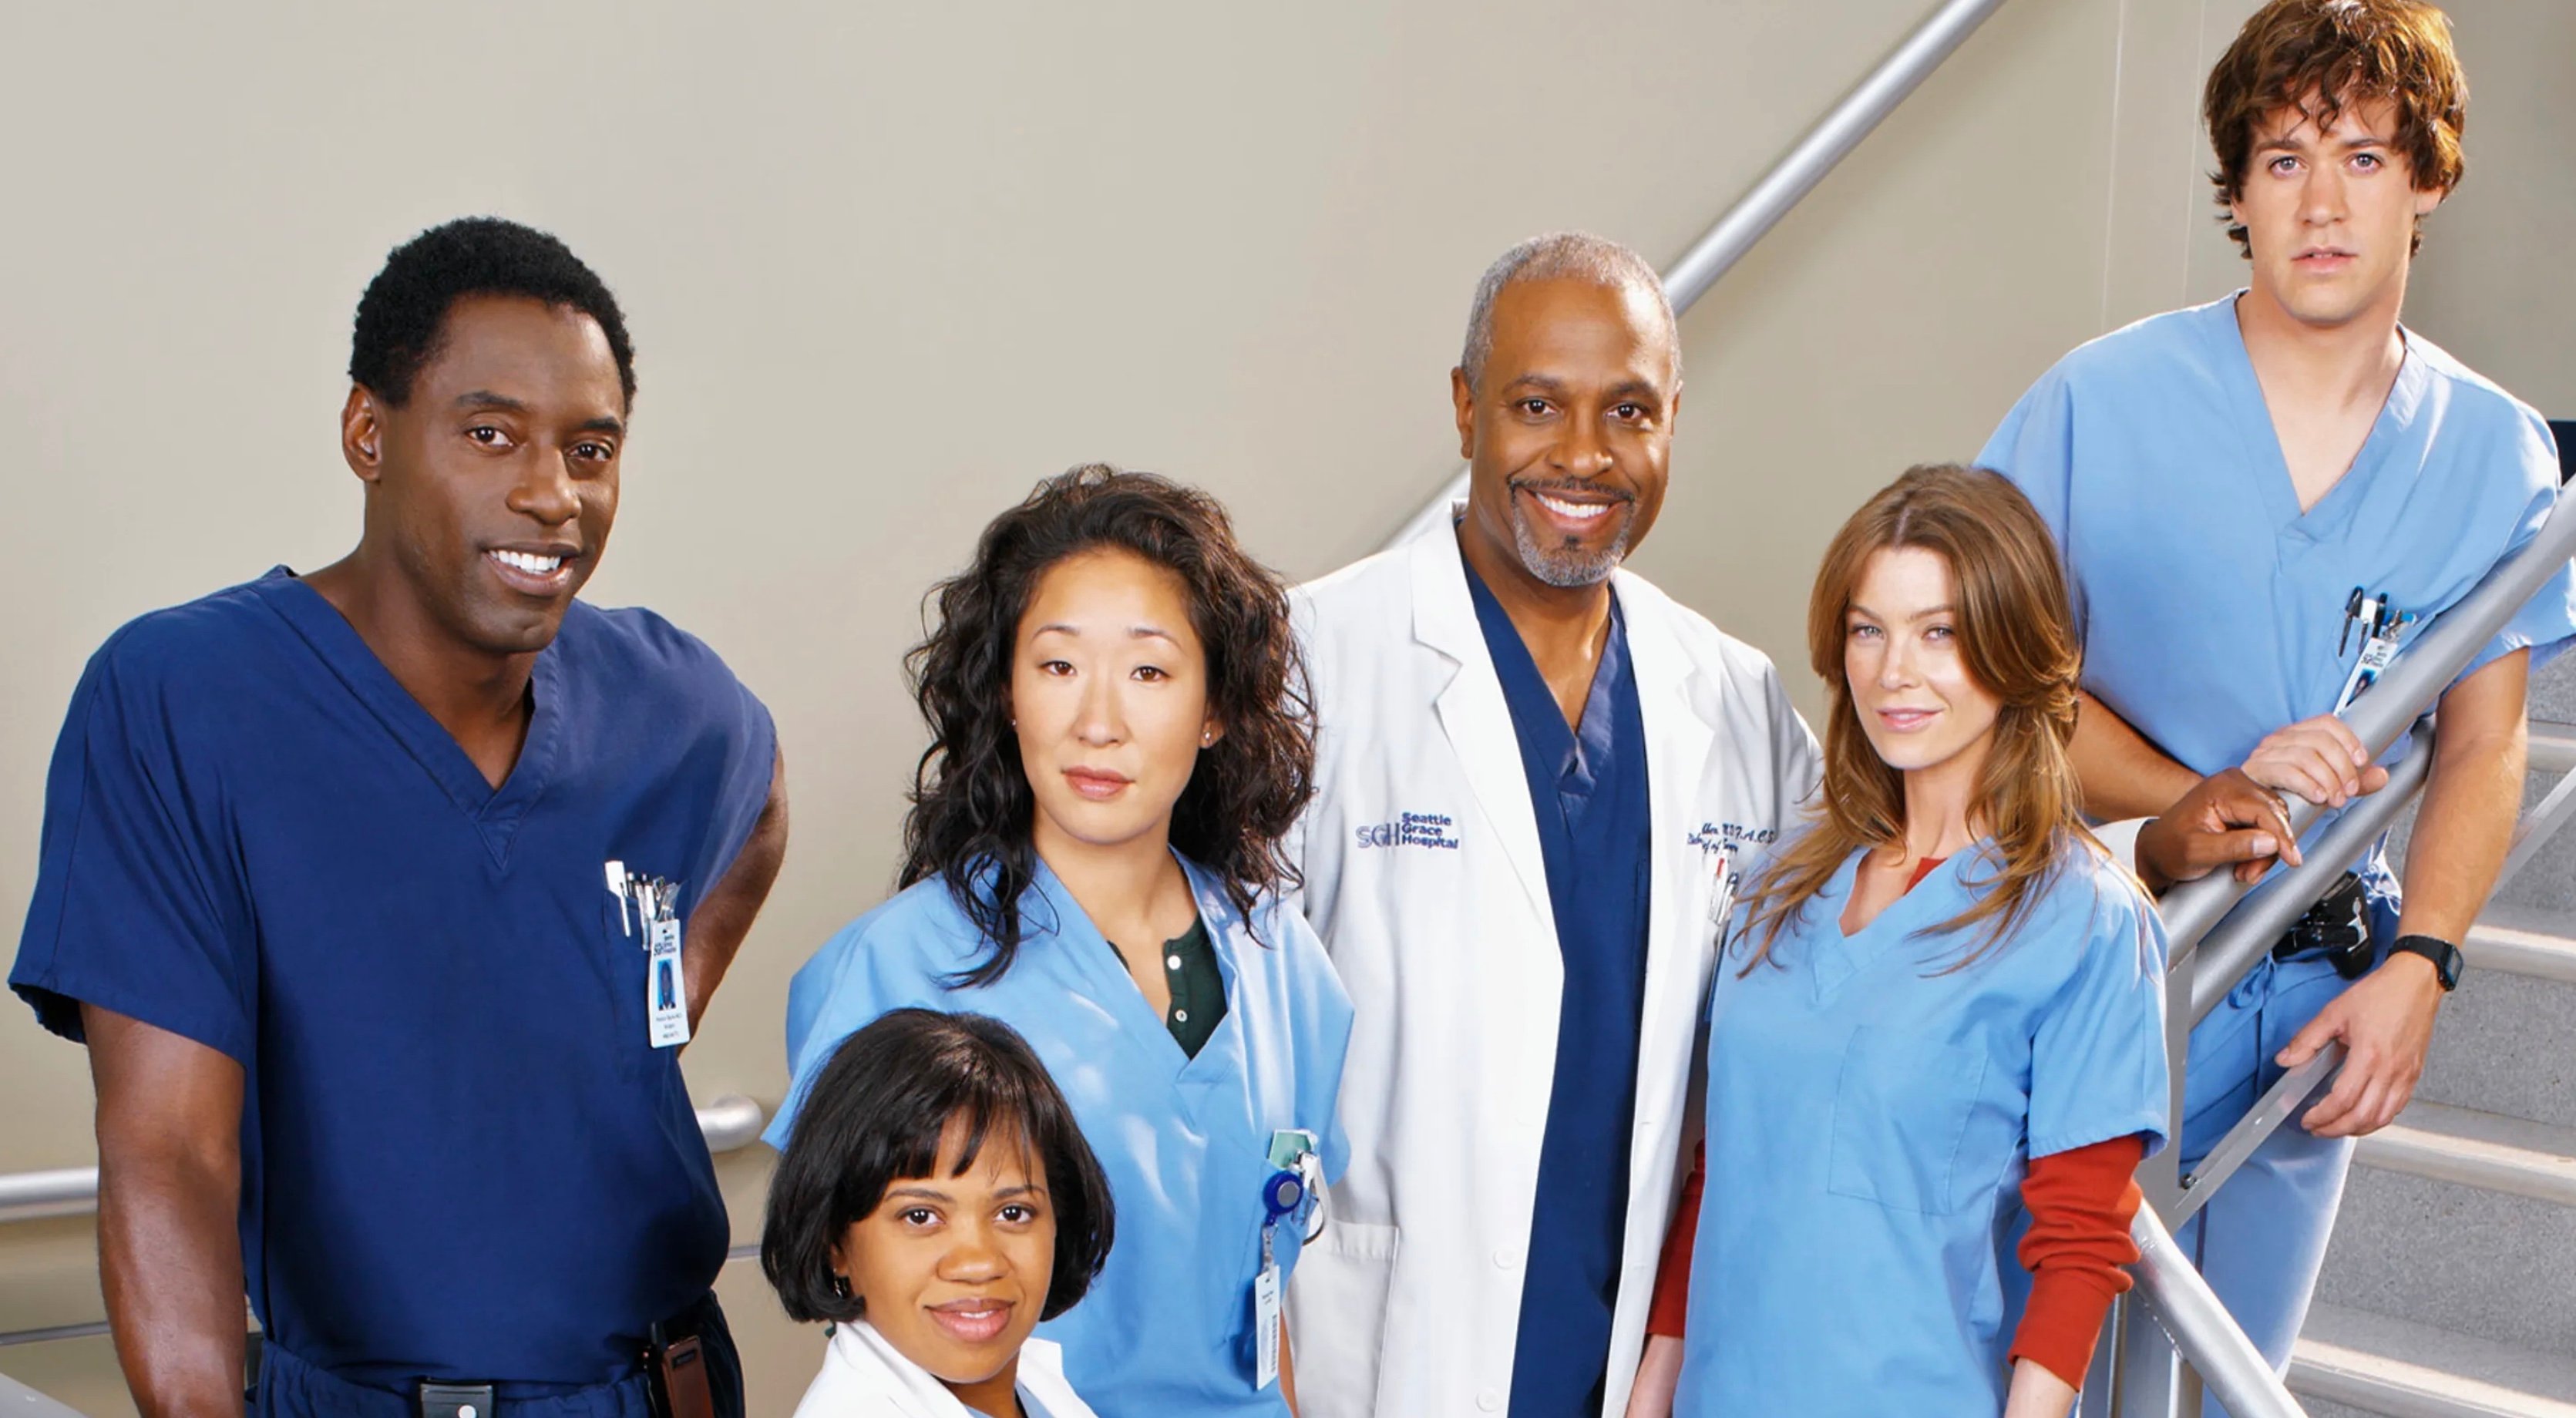 How Much Do You Know About Grey's Anatomy?